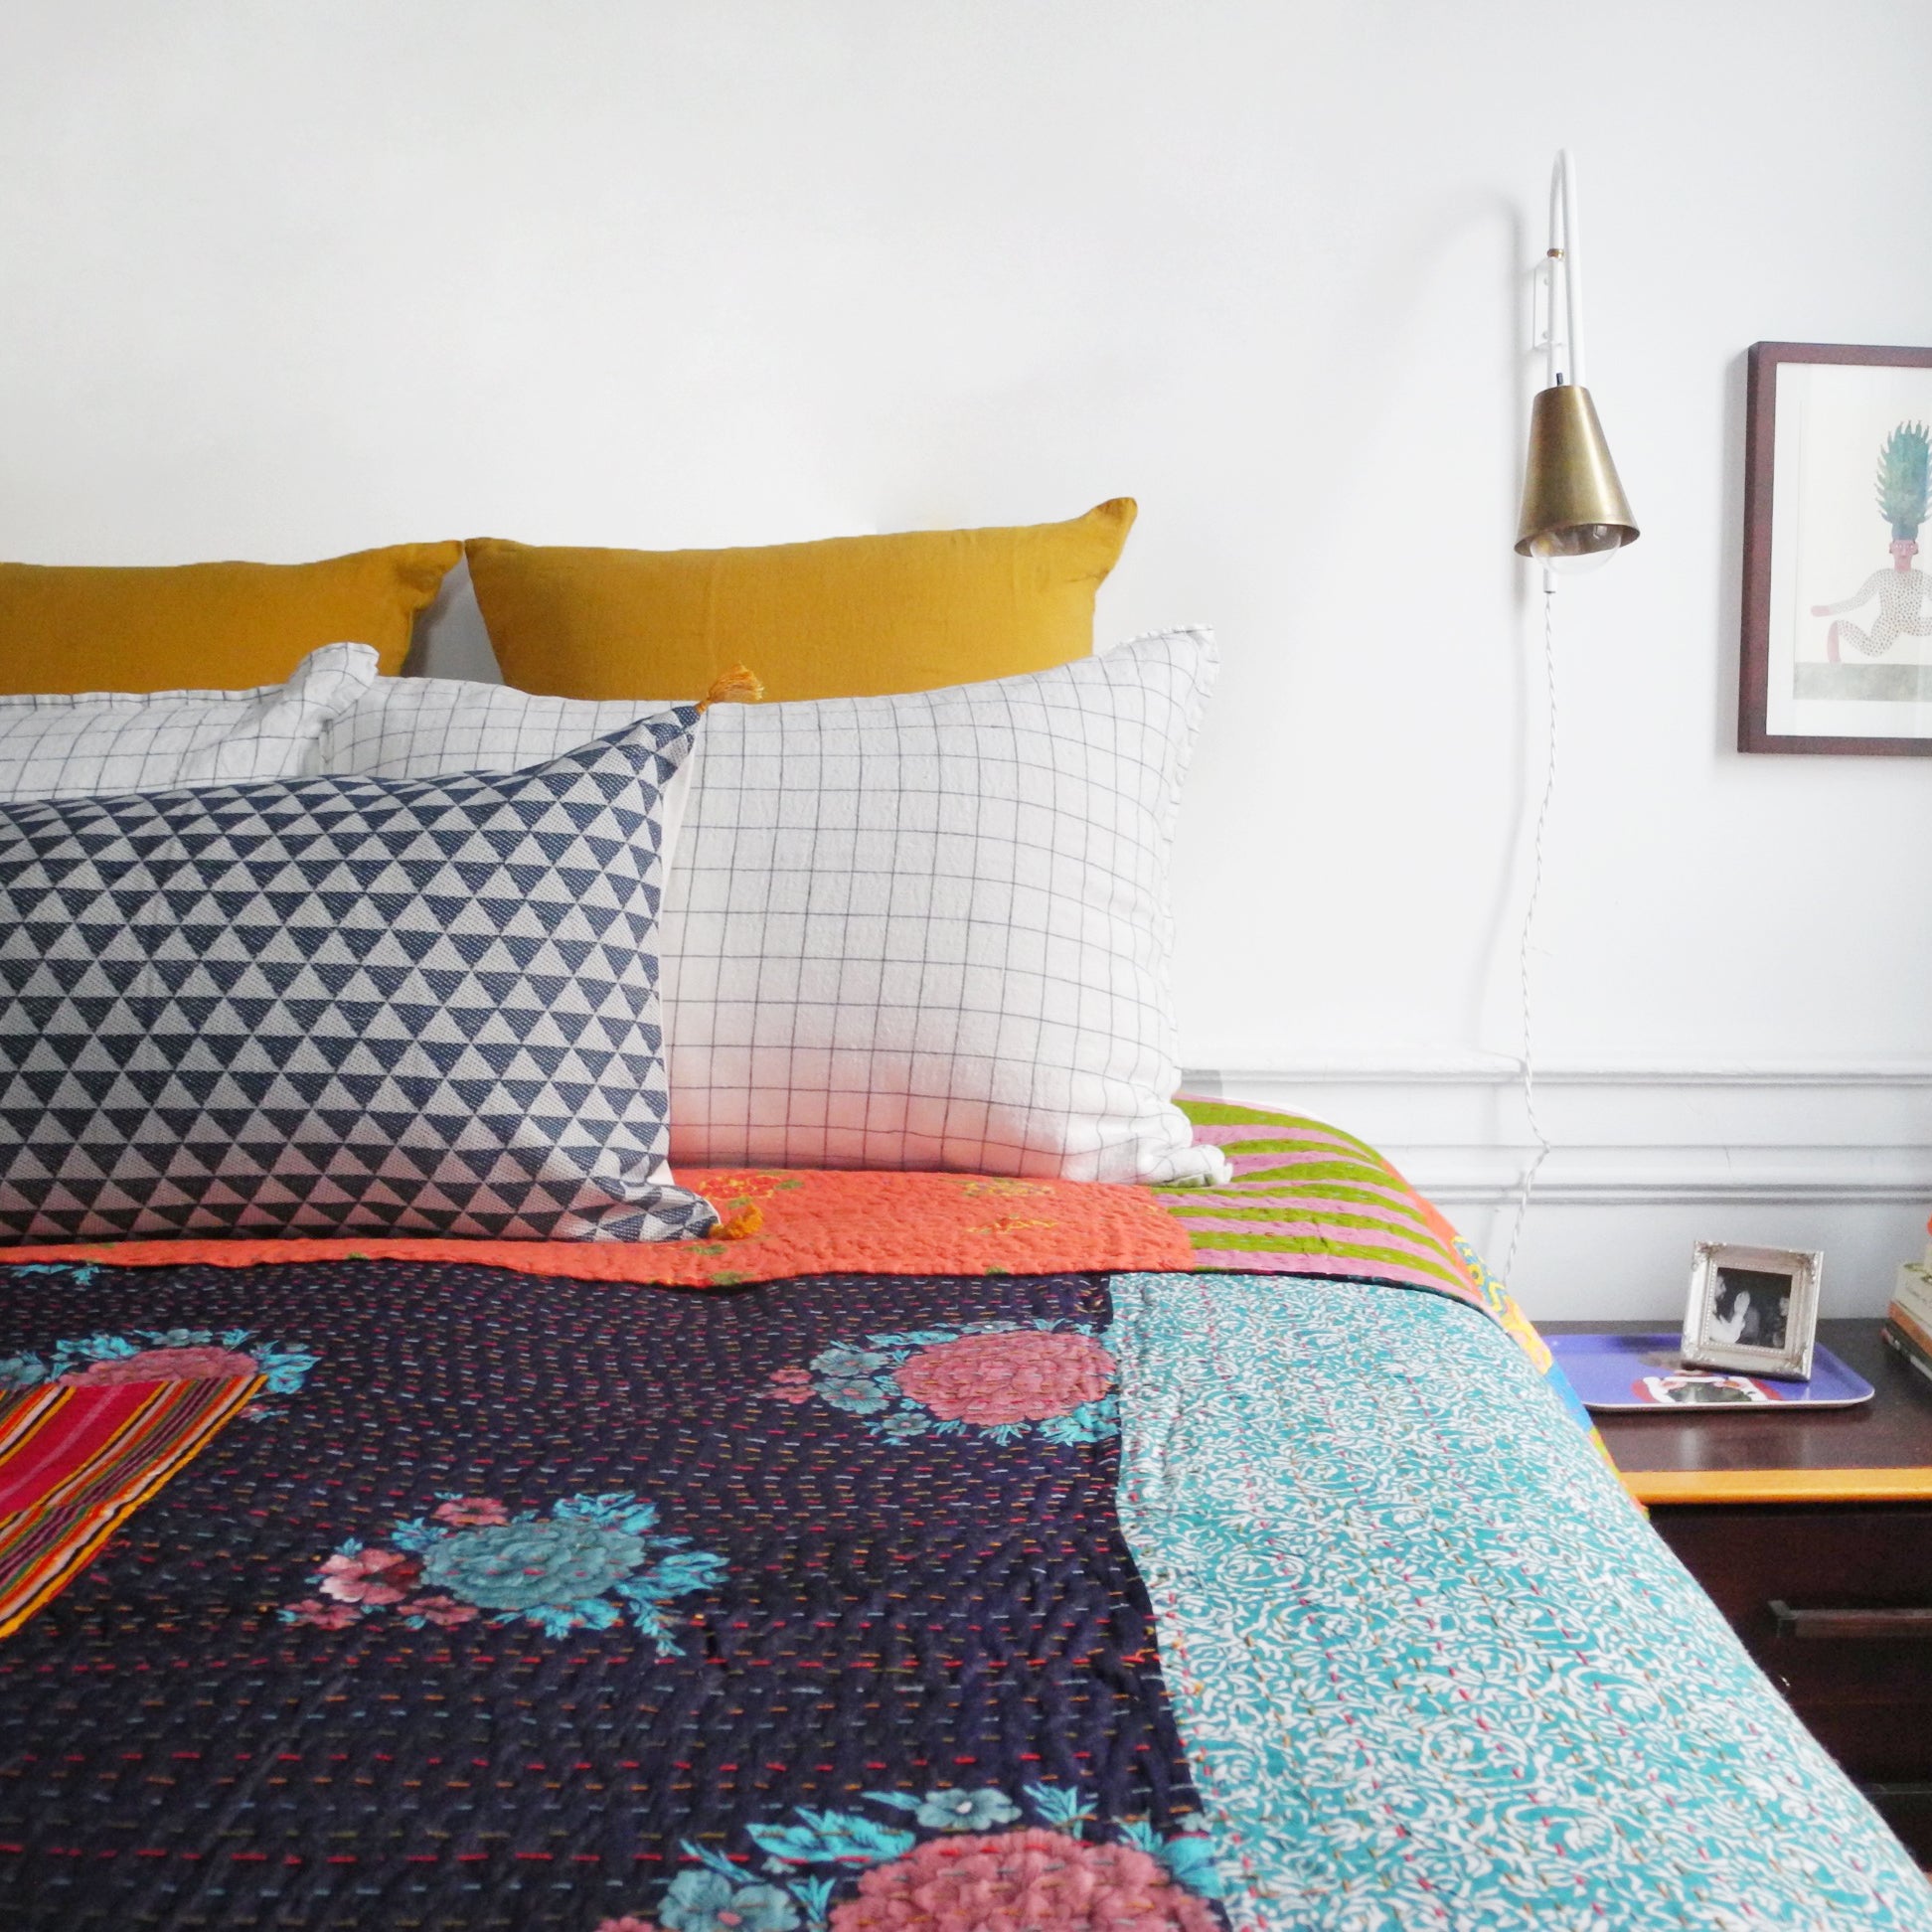 Linge Particulier Honey Yellow Euro Linen Pillowcase Sham with a Lisa Corti Gudri Kantha quilt for a colorful linen bedding look in mustard yellow - Collyer's Mansion